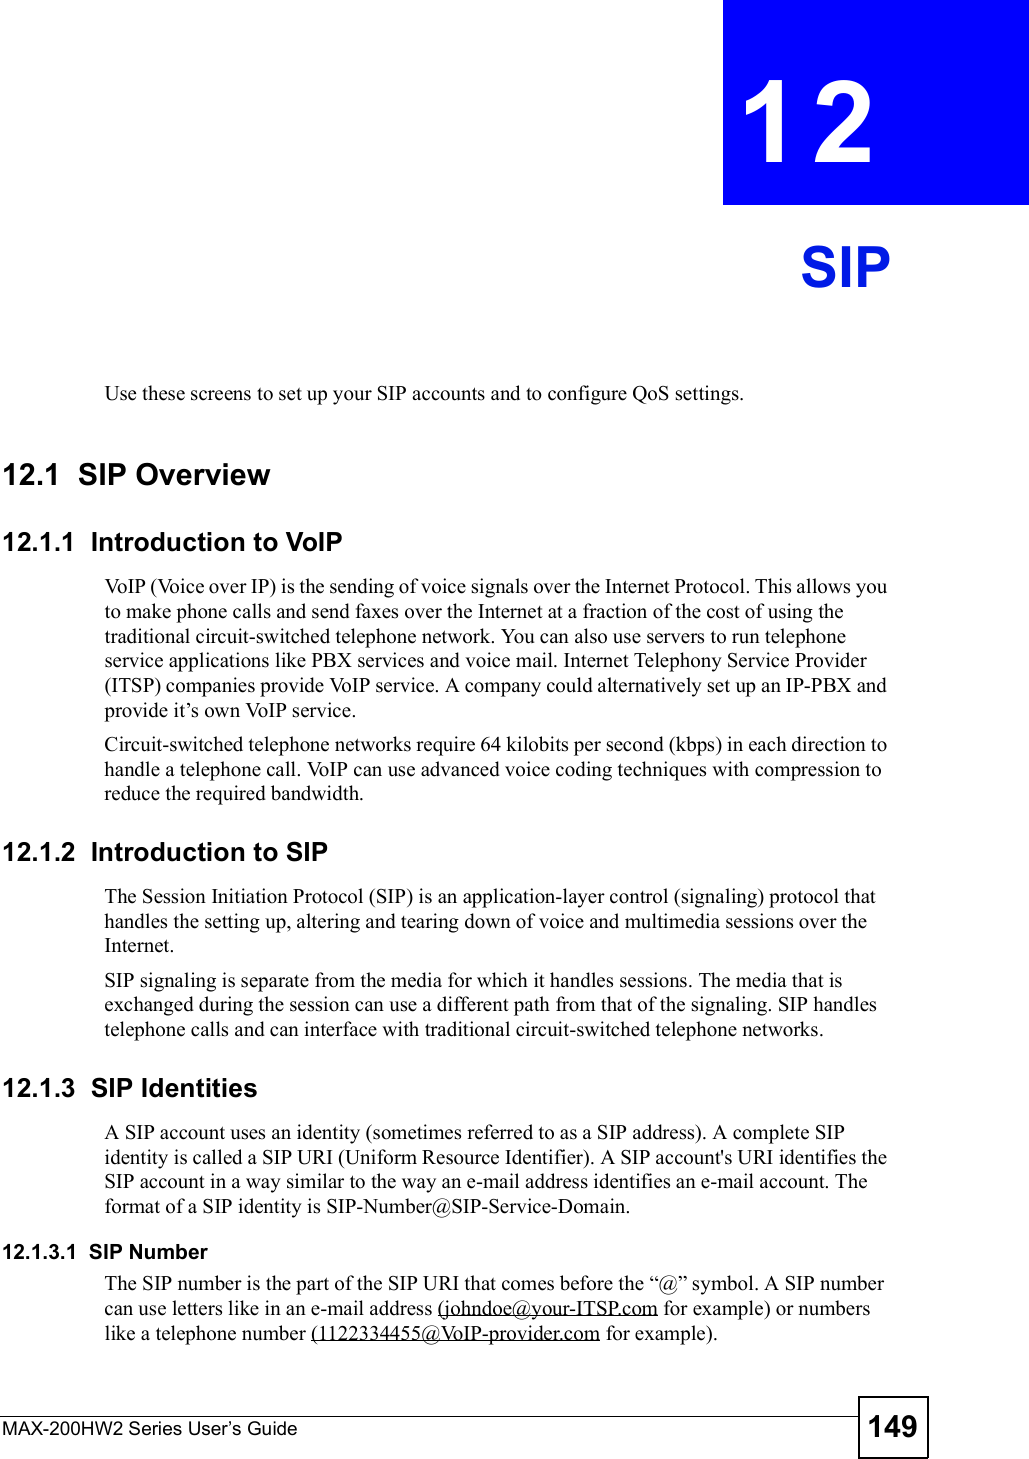 MAX-200HW2 Series User s Guide 149CHAPTER 12SIPUse these screens to set up your SIP accounts and to configure QoS settings.12.1  SIP Overview12.1.1  Introduction to VoIPVoIP (Voice over IP) is the sending of voice signals over the Internet Protocol. This allows you to make phone calls and send faxes over the Internet at a fraction of the cost of using the traditional circuit-switched telephone network. You can also use servers to run telephone service applications like PBX services and voice mail. Internet Telephony Service Provider (ITSP) companies provide VoIP service. A company could alternatively set up an IP-PBX and provide it!s own VoIP service.Circuit-switched telephone networks require 64 kilobits per second (kbps) in each direction to handle a telephone call. VoIP can use advanced voice coding techniques with compression to reduce the required bandwidth. 12.1.2  Introduction to SIPThe Session Initiation Protocol (SIP) is an application-layer control (signaling) protocol that handles the setting up, altering and tearing down of voice and multimedia sessions over the Internet.SIP signaling is separate from the media for which it handles sessions. The media that is exchanged during the session can use a different path from that of the signaling. SIP handles telephone calls and can interface with traditional circuit-switched telephone networks.12.1.3  SIP IdentitiesA SIP account uses an identity (sometimes referred to as a SIP address). A complete SIP identity is called a SIP URI (Uniform Resource Identifier). A SIP account&apos;s URI identifies the SIP account in a way similar to the way an e-mail address identifies an e-mail account. The format of a SIP identity is SIP-Number@SIP-Service-Domain.12.1.3.1  SIP NumberThe SIP number is the part of the SIP URI that comes before the &quot;@# symbol. A SIP number can use letters like in an e-mail address (johndoe@your-ITSP.com for example) or numbers like a telephone number (1122334455@VoIP-provider.com for example).